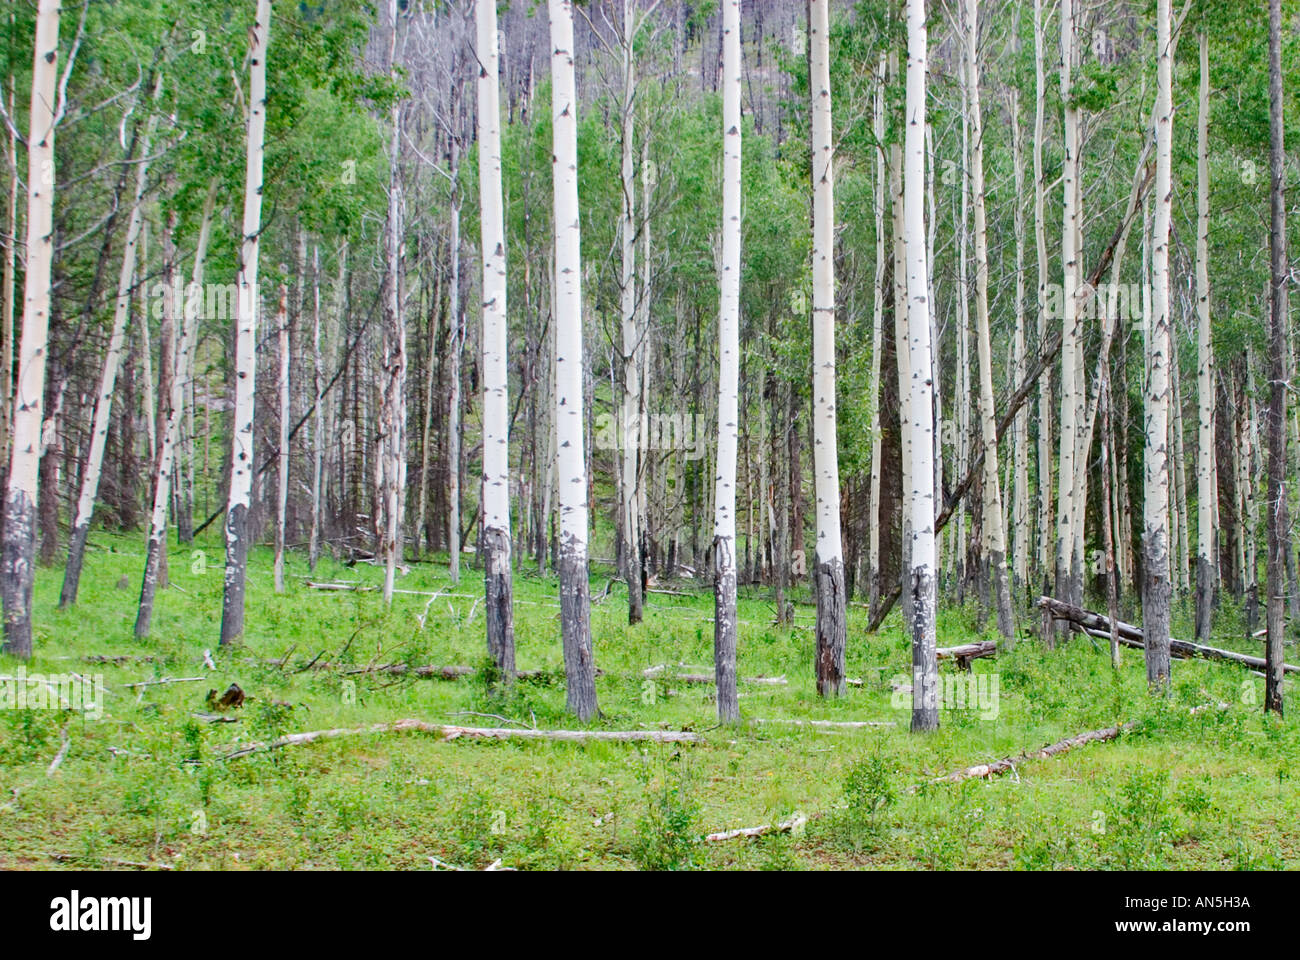 Fire damaged aspens show the effects of a recent forest fire Stock Photo